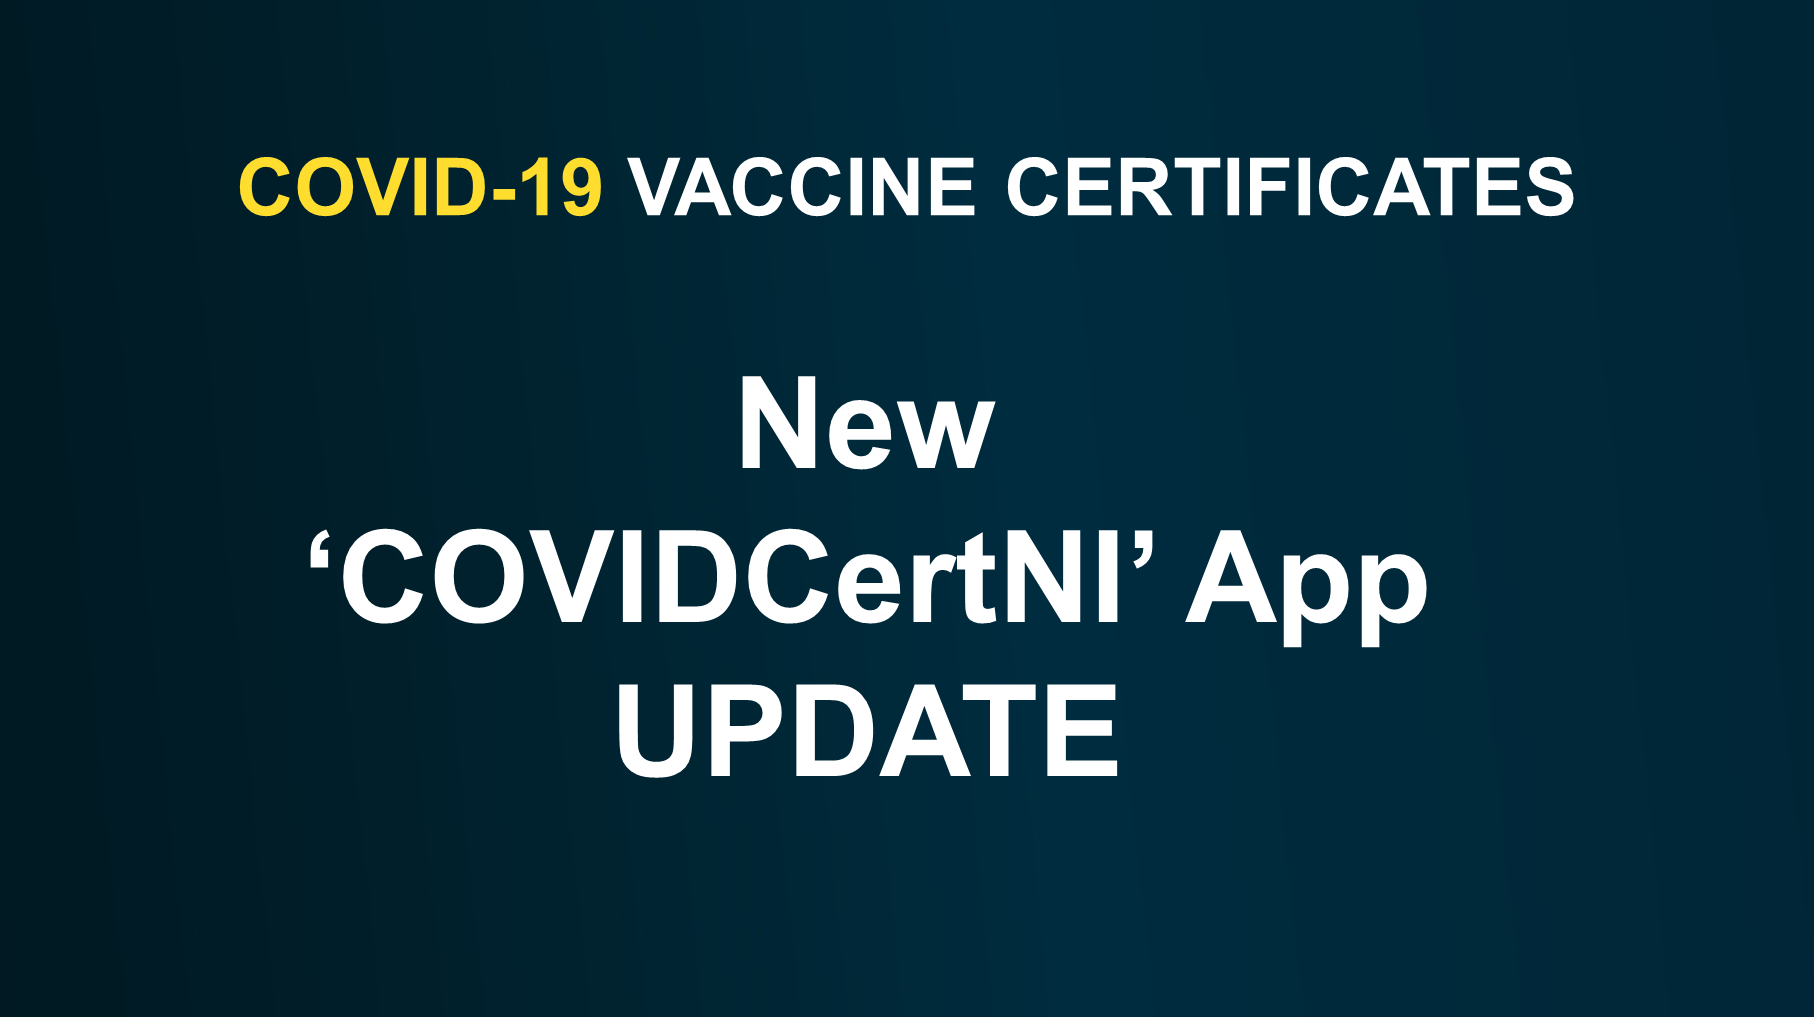 Update on Vaccine Certification Service and COVIDCert NI App